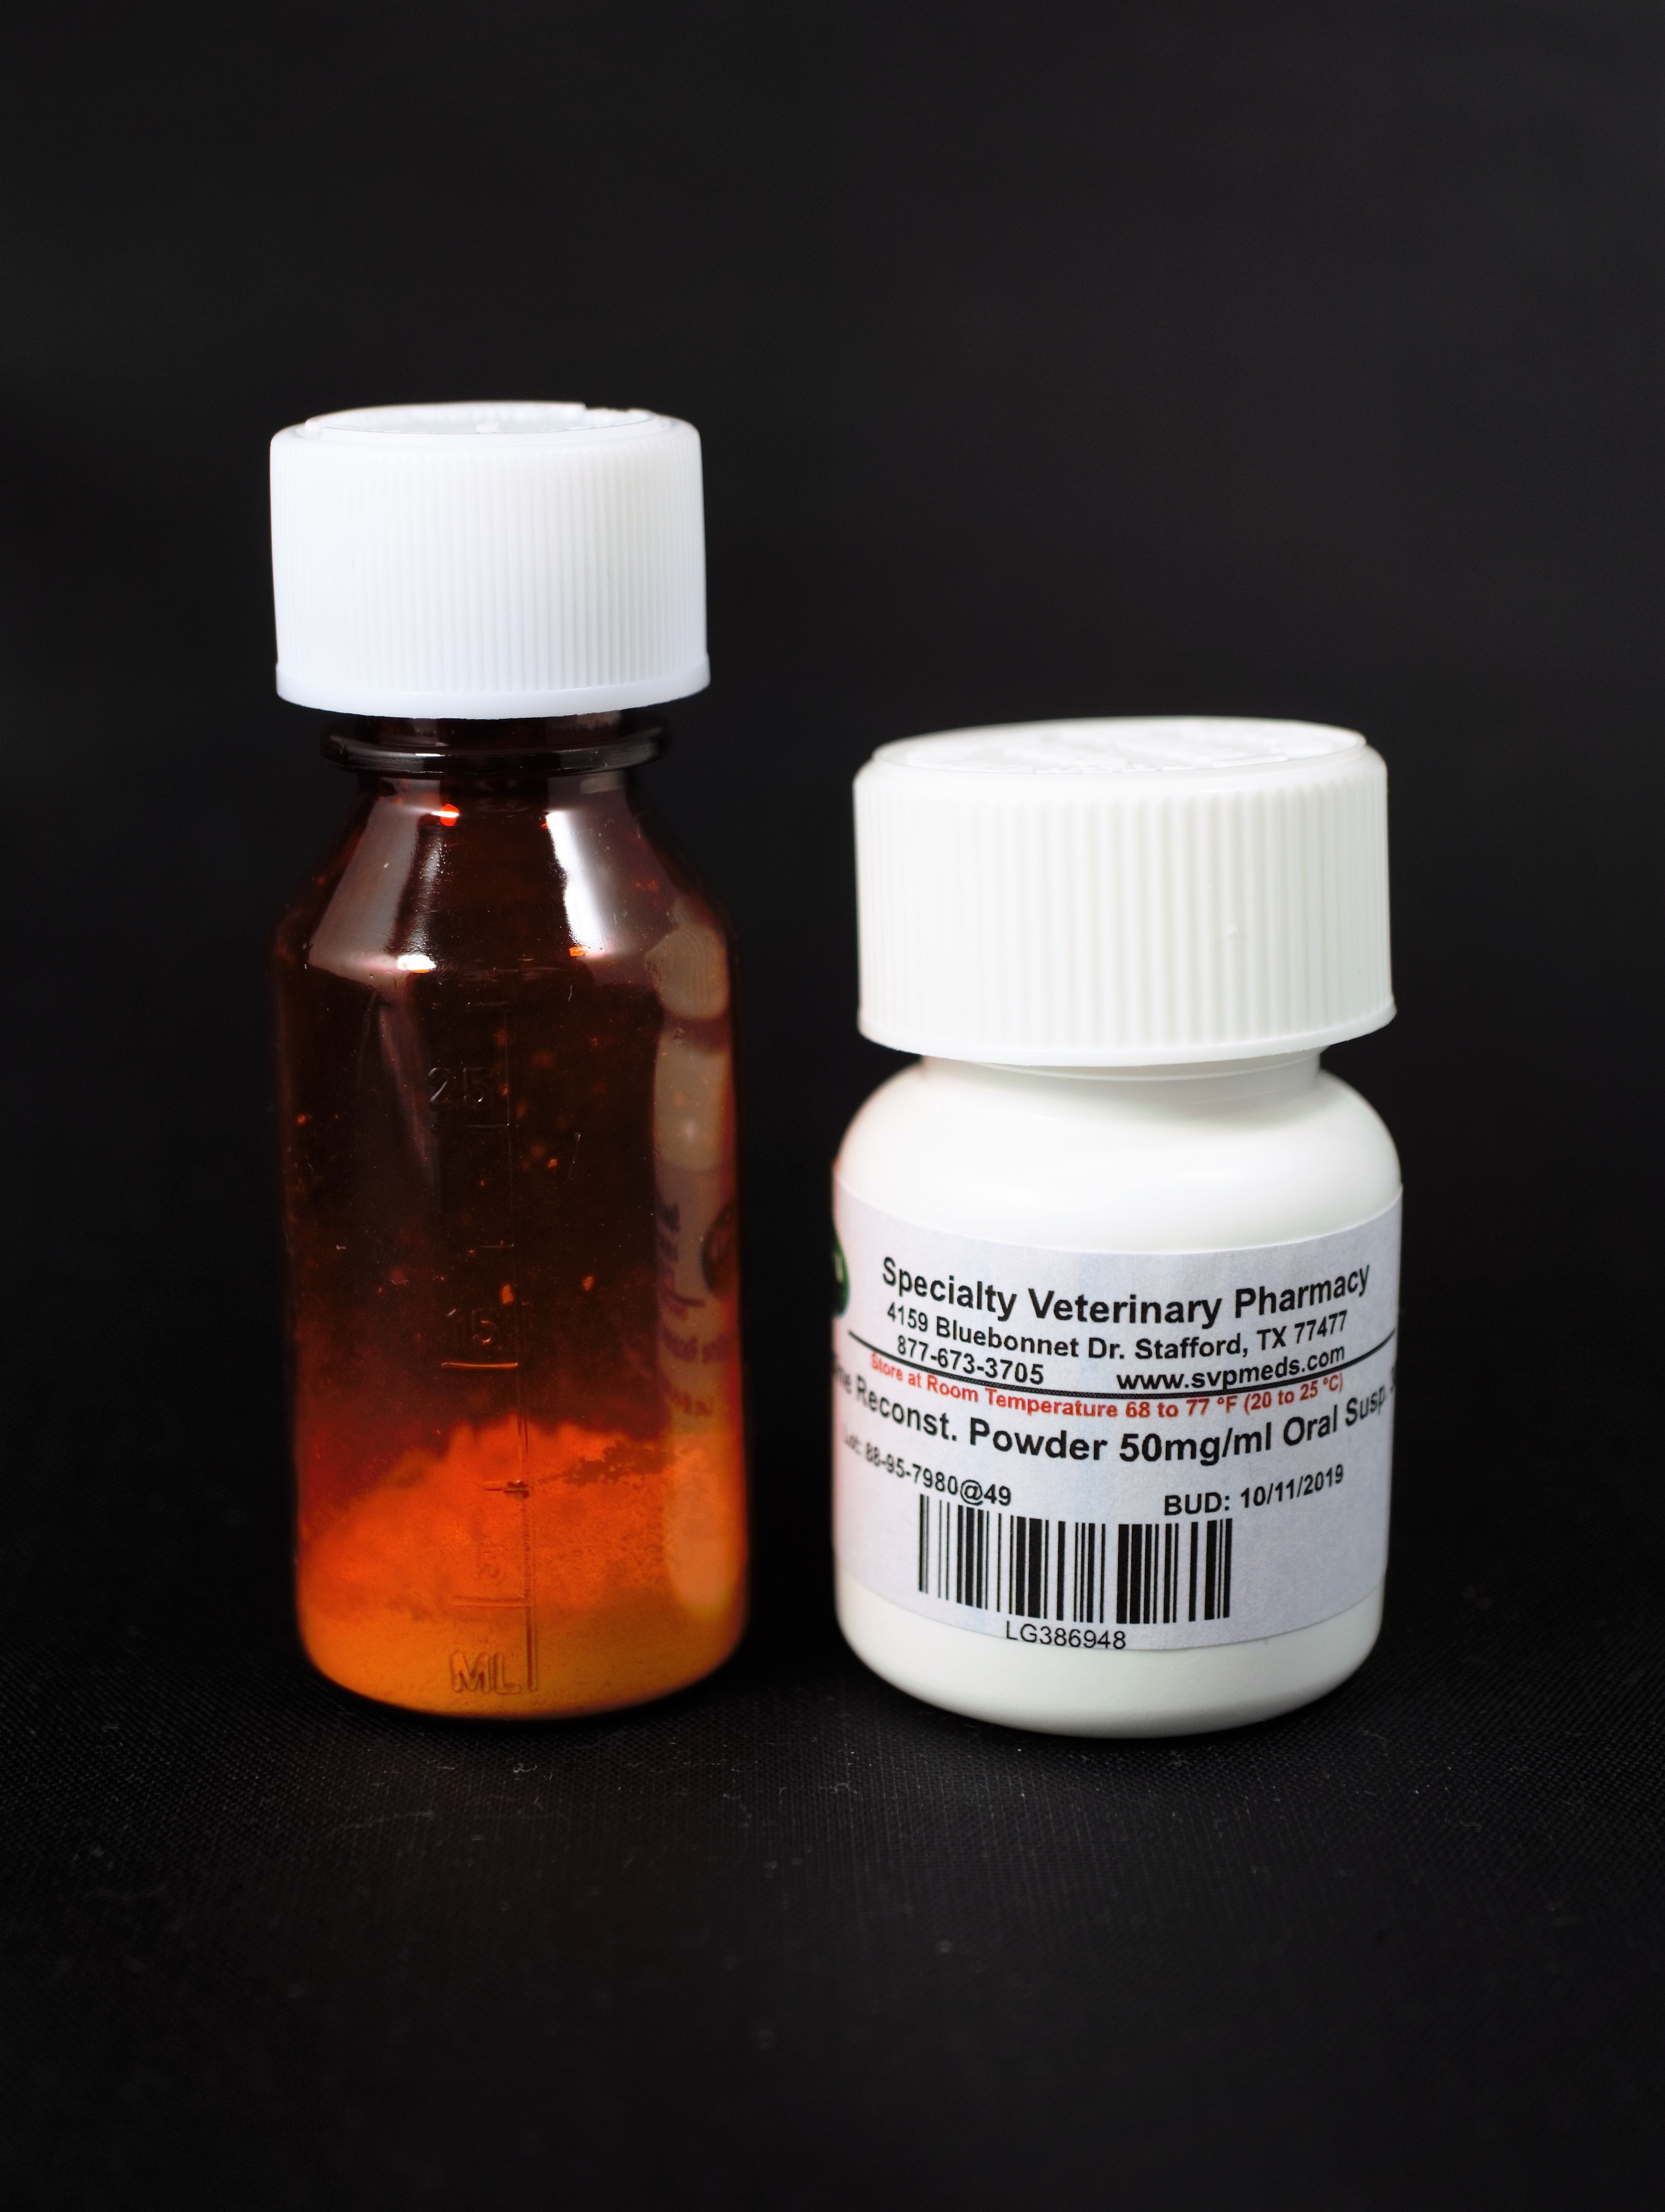 Doxycycline Oral Liquid RECONSTITUTE compounded for dogs and cats